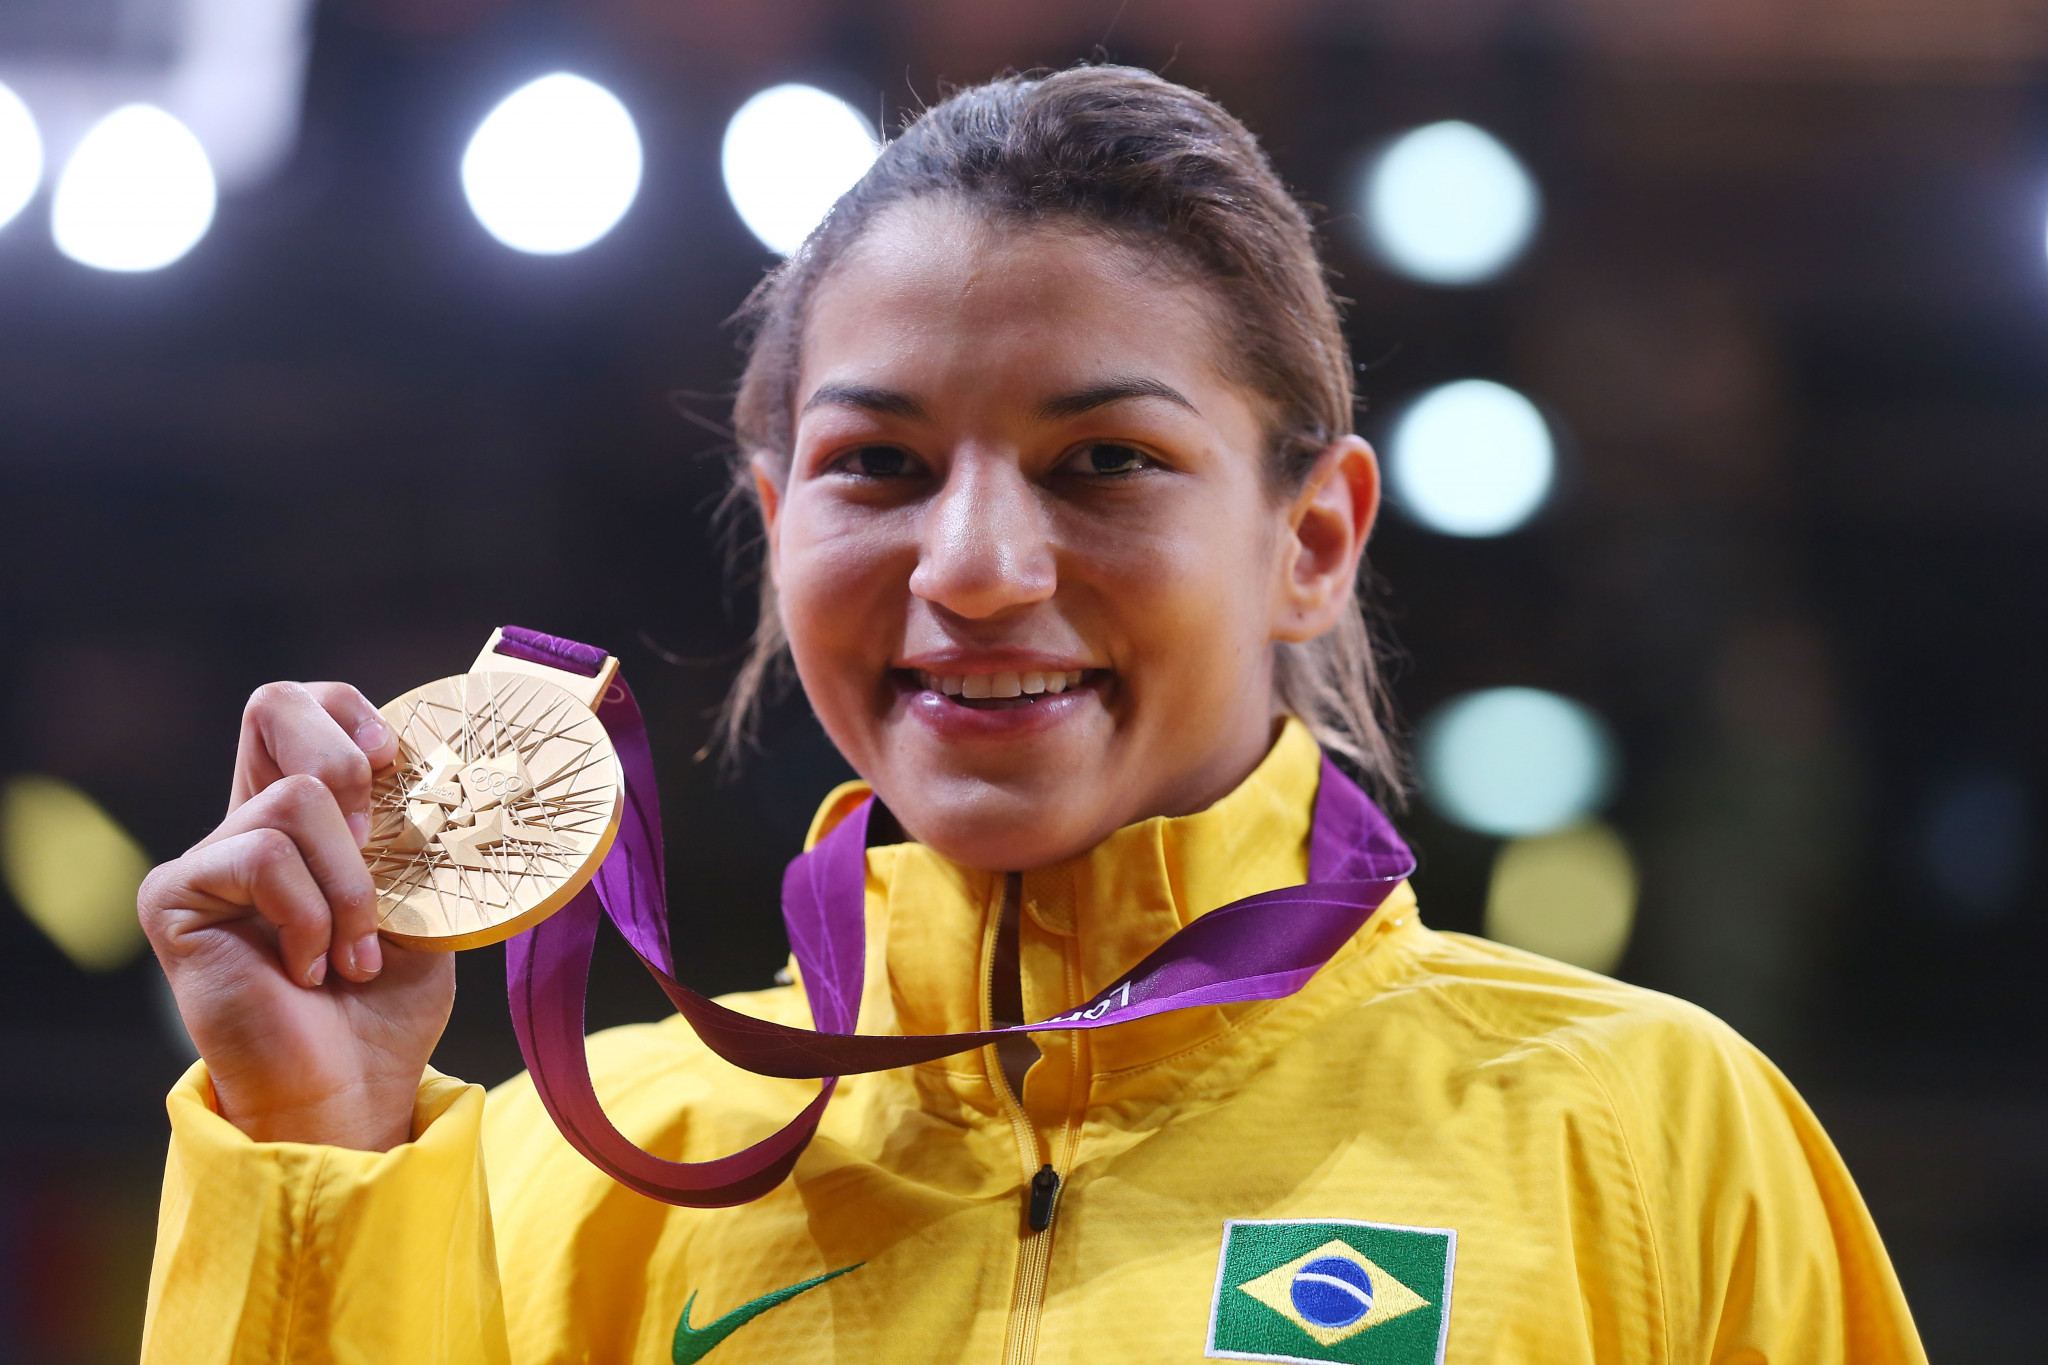 Sarah Menezes won Olympic judo gold at London 2012 having previously taken part in the Youth School Games ©Getty Images